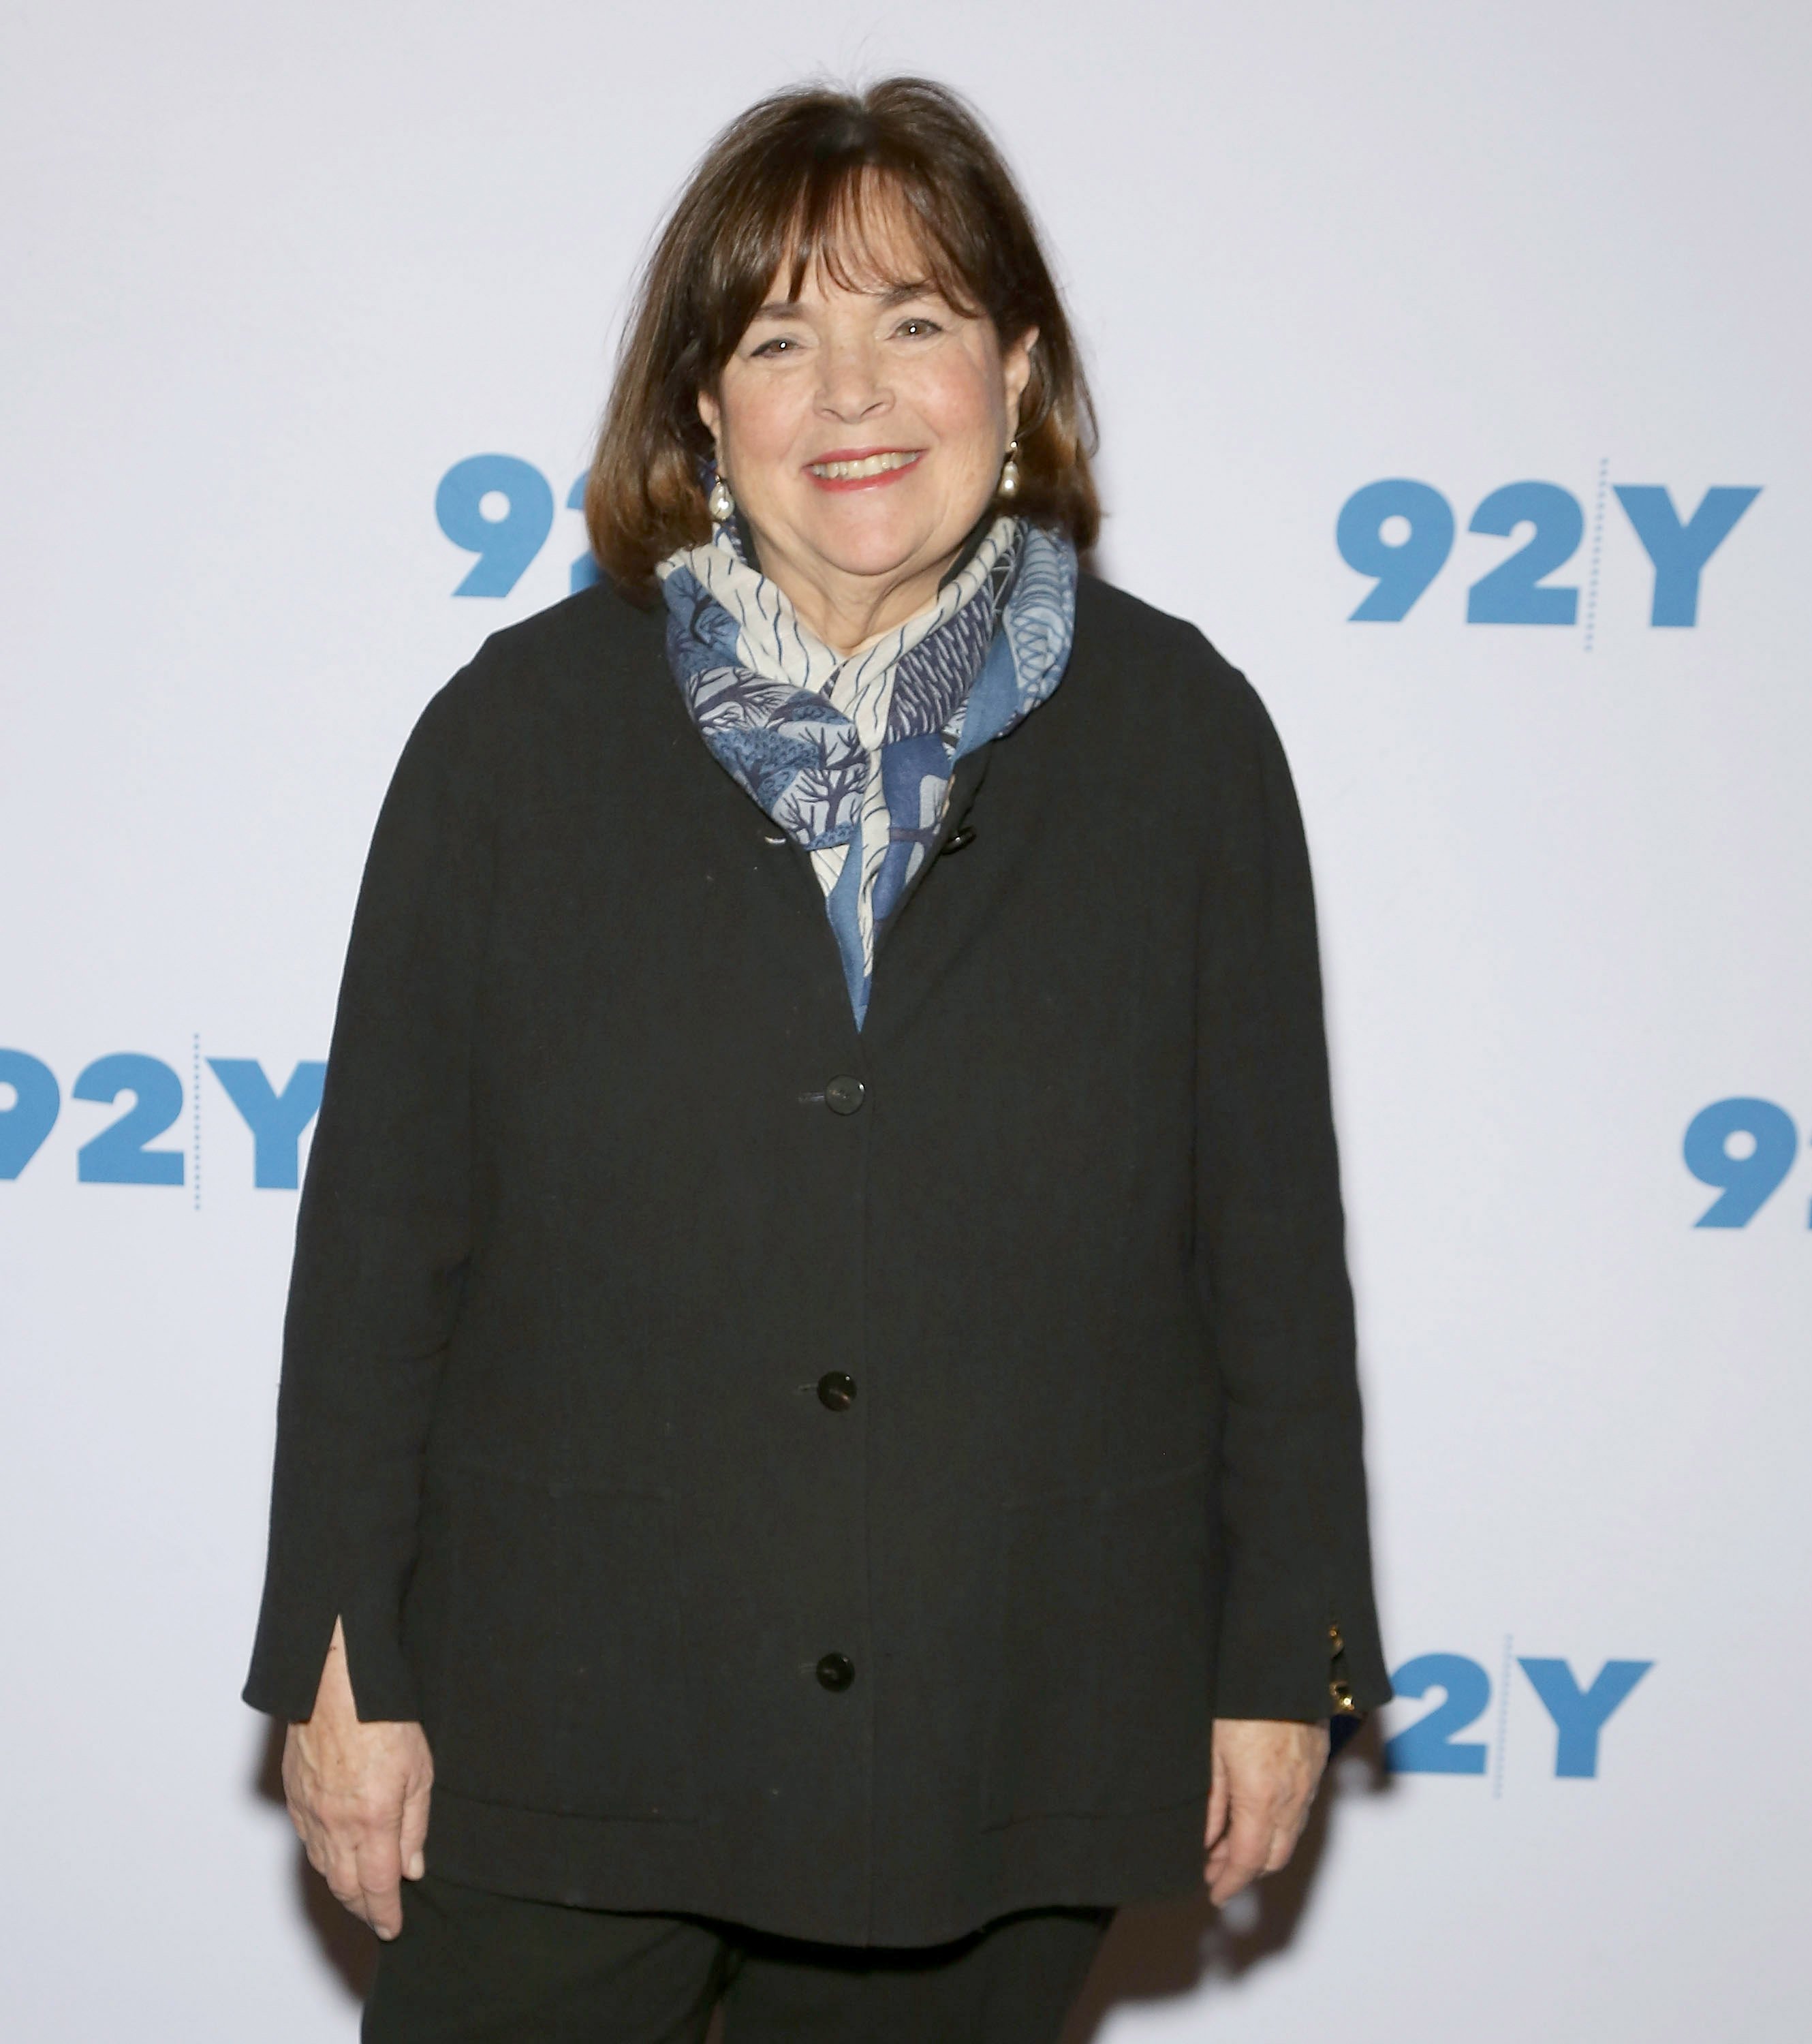 Ina Garten attends Ina Garten in Conversation with Danny Meyer at 92nd Street Y on January 31, 2017 | Photo: GettyImages